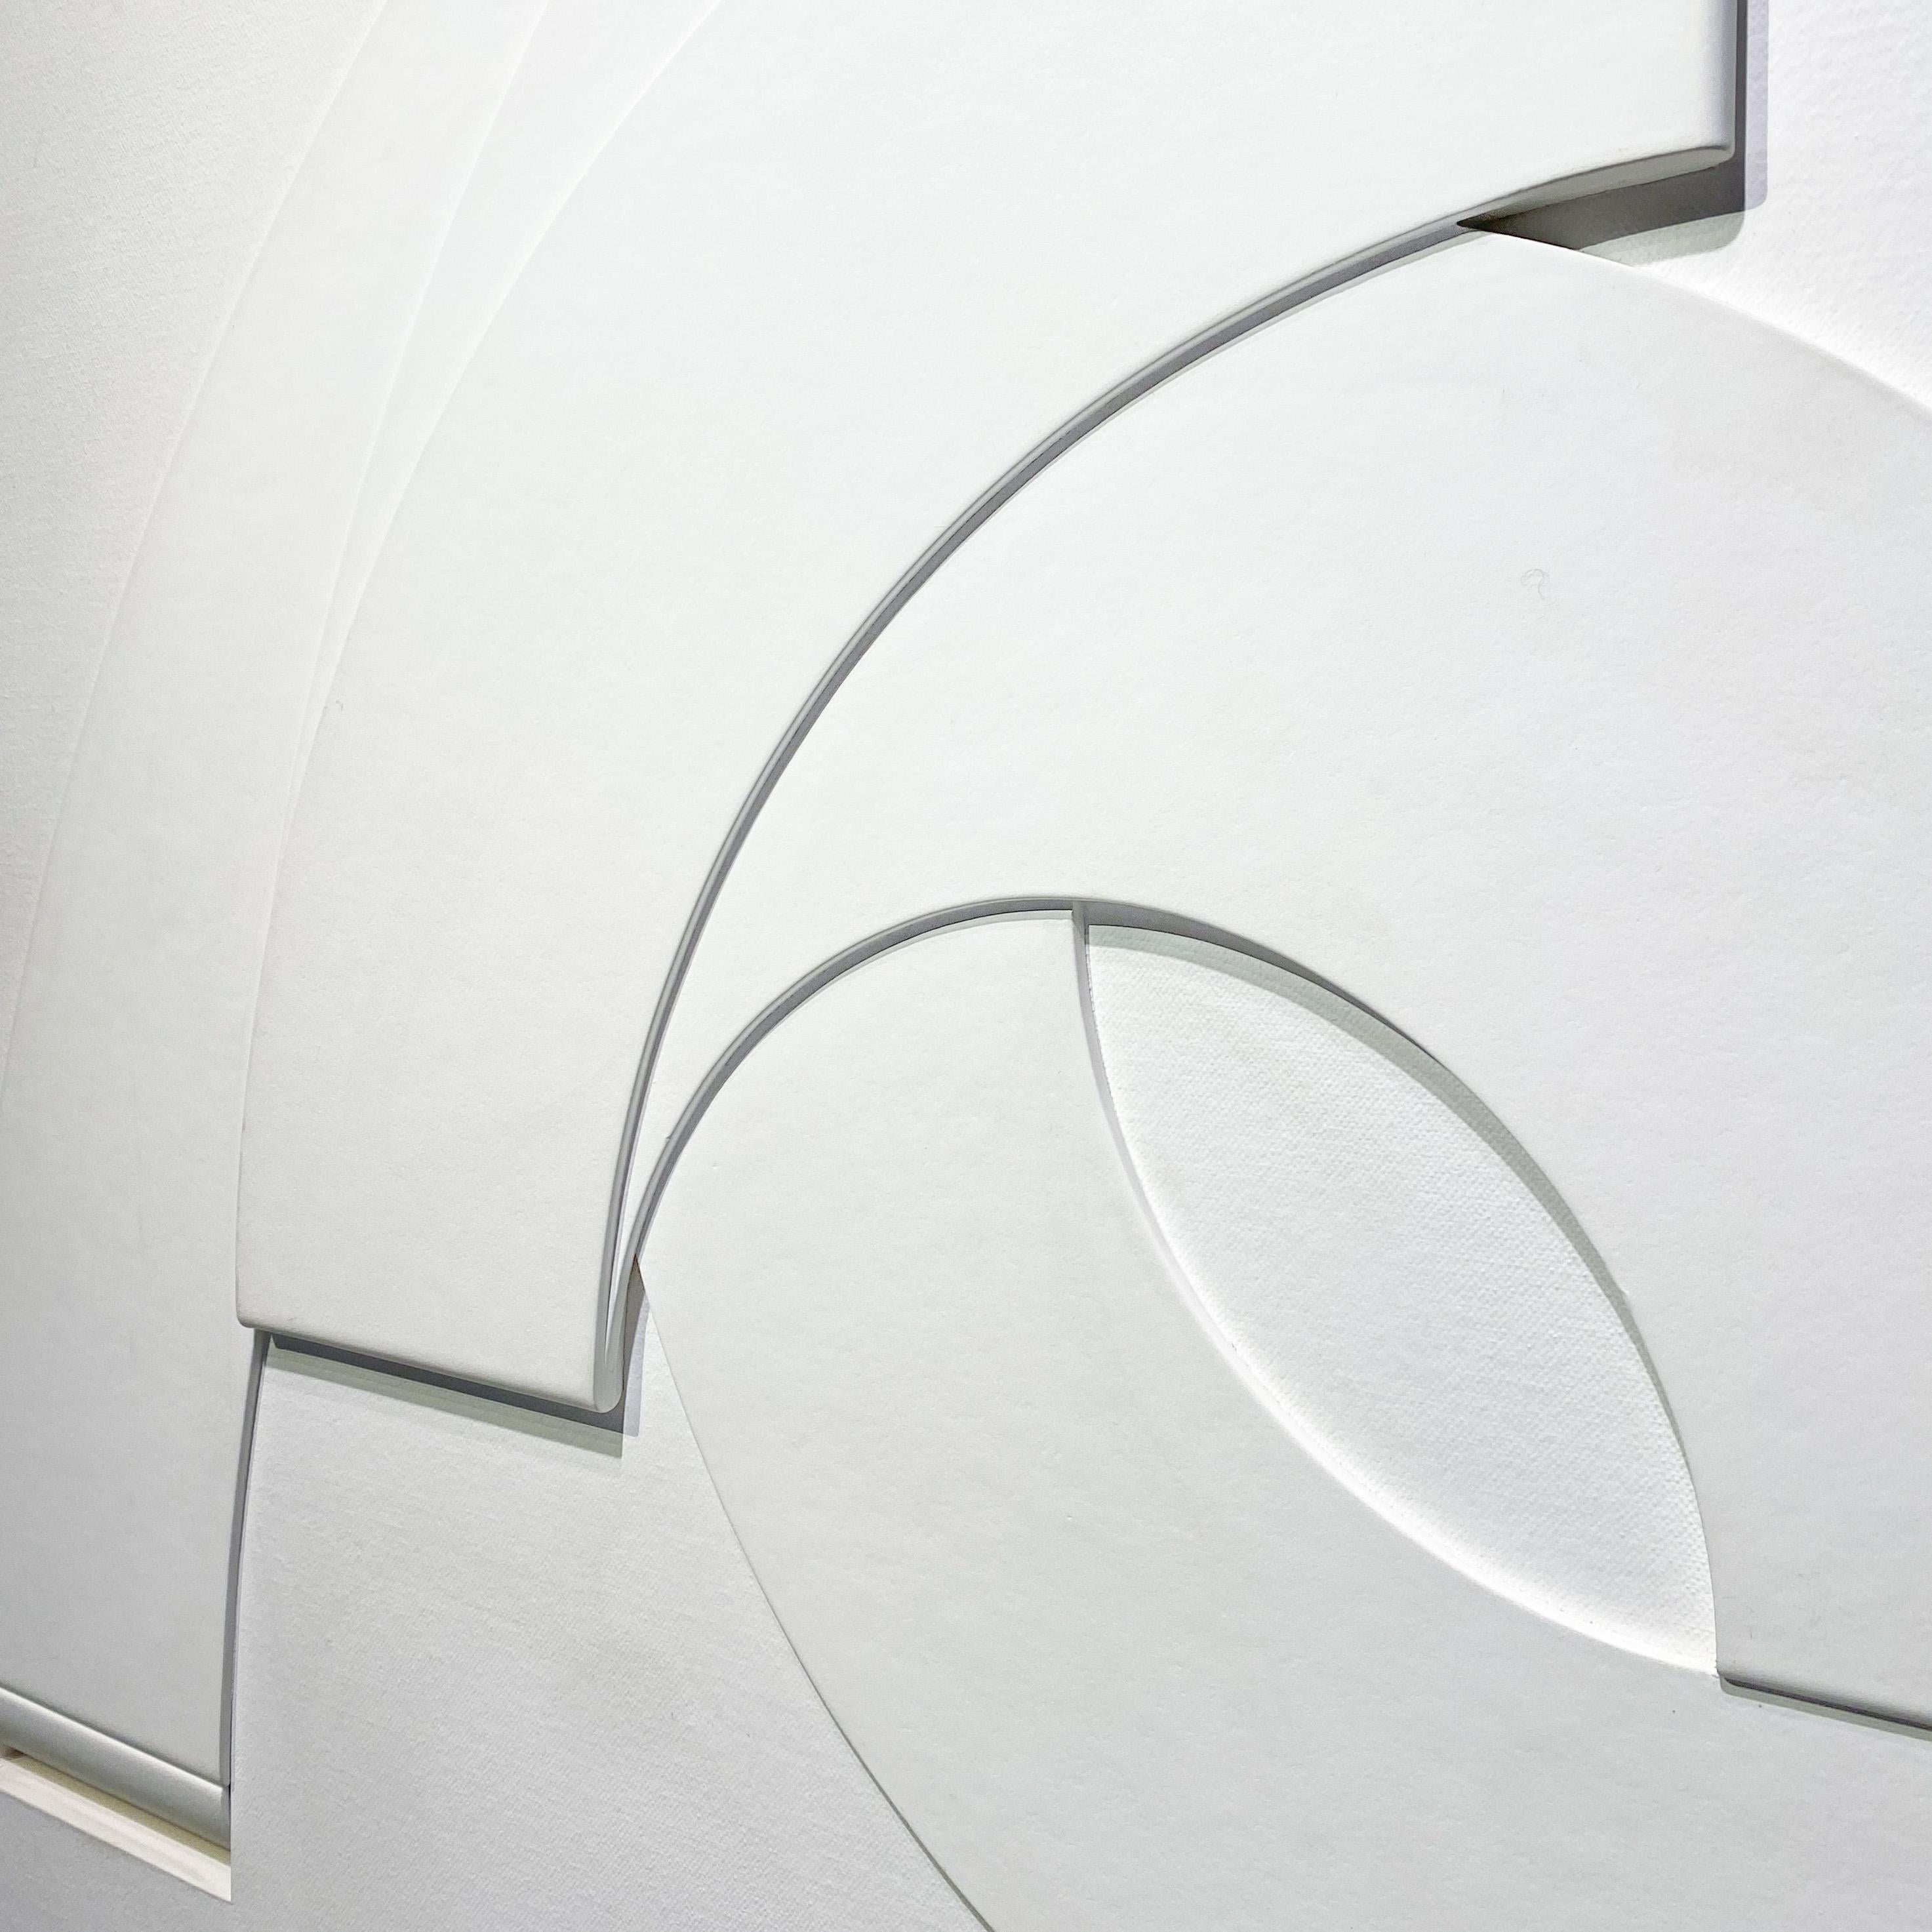 Late 20th Century Minimalist Geometric Abstract Relief in Tonal Whites by Dutch Artist For Sale